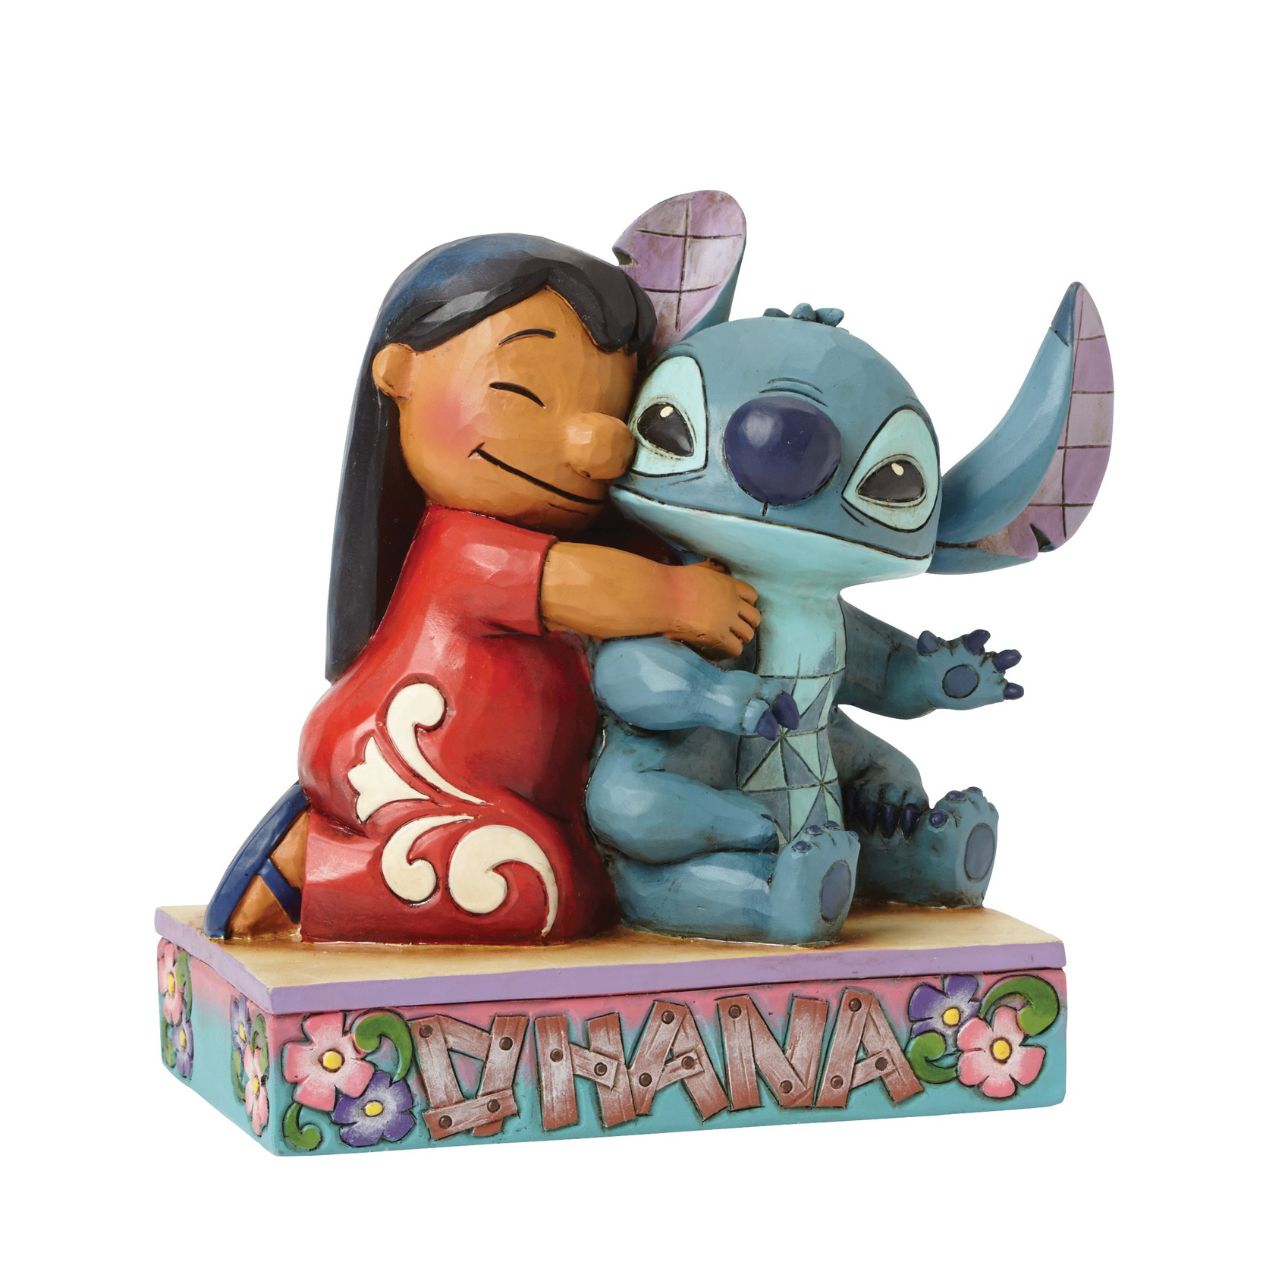 Jim Shore Ohana Means Family Lilo and Stitch Figurine  Lilo and Stitch come together in an exemplary display of Ohana which means family. This heart-warming piece has been designed by award winning artist and sculptor, Jim Shore for the Disney Traditions range.